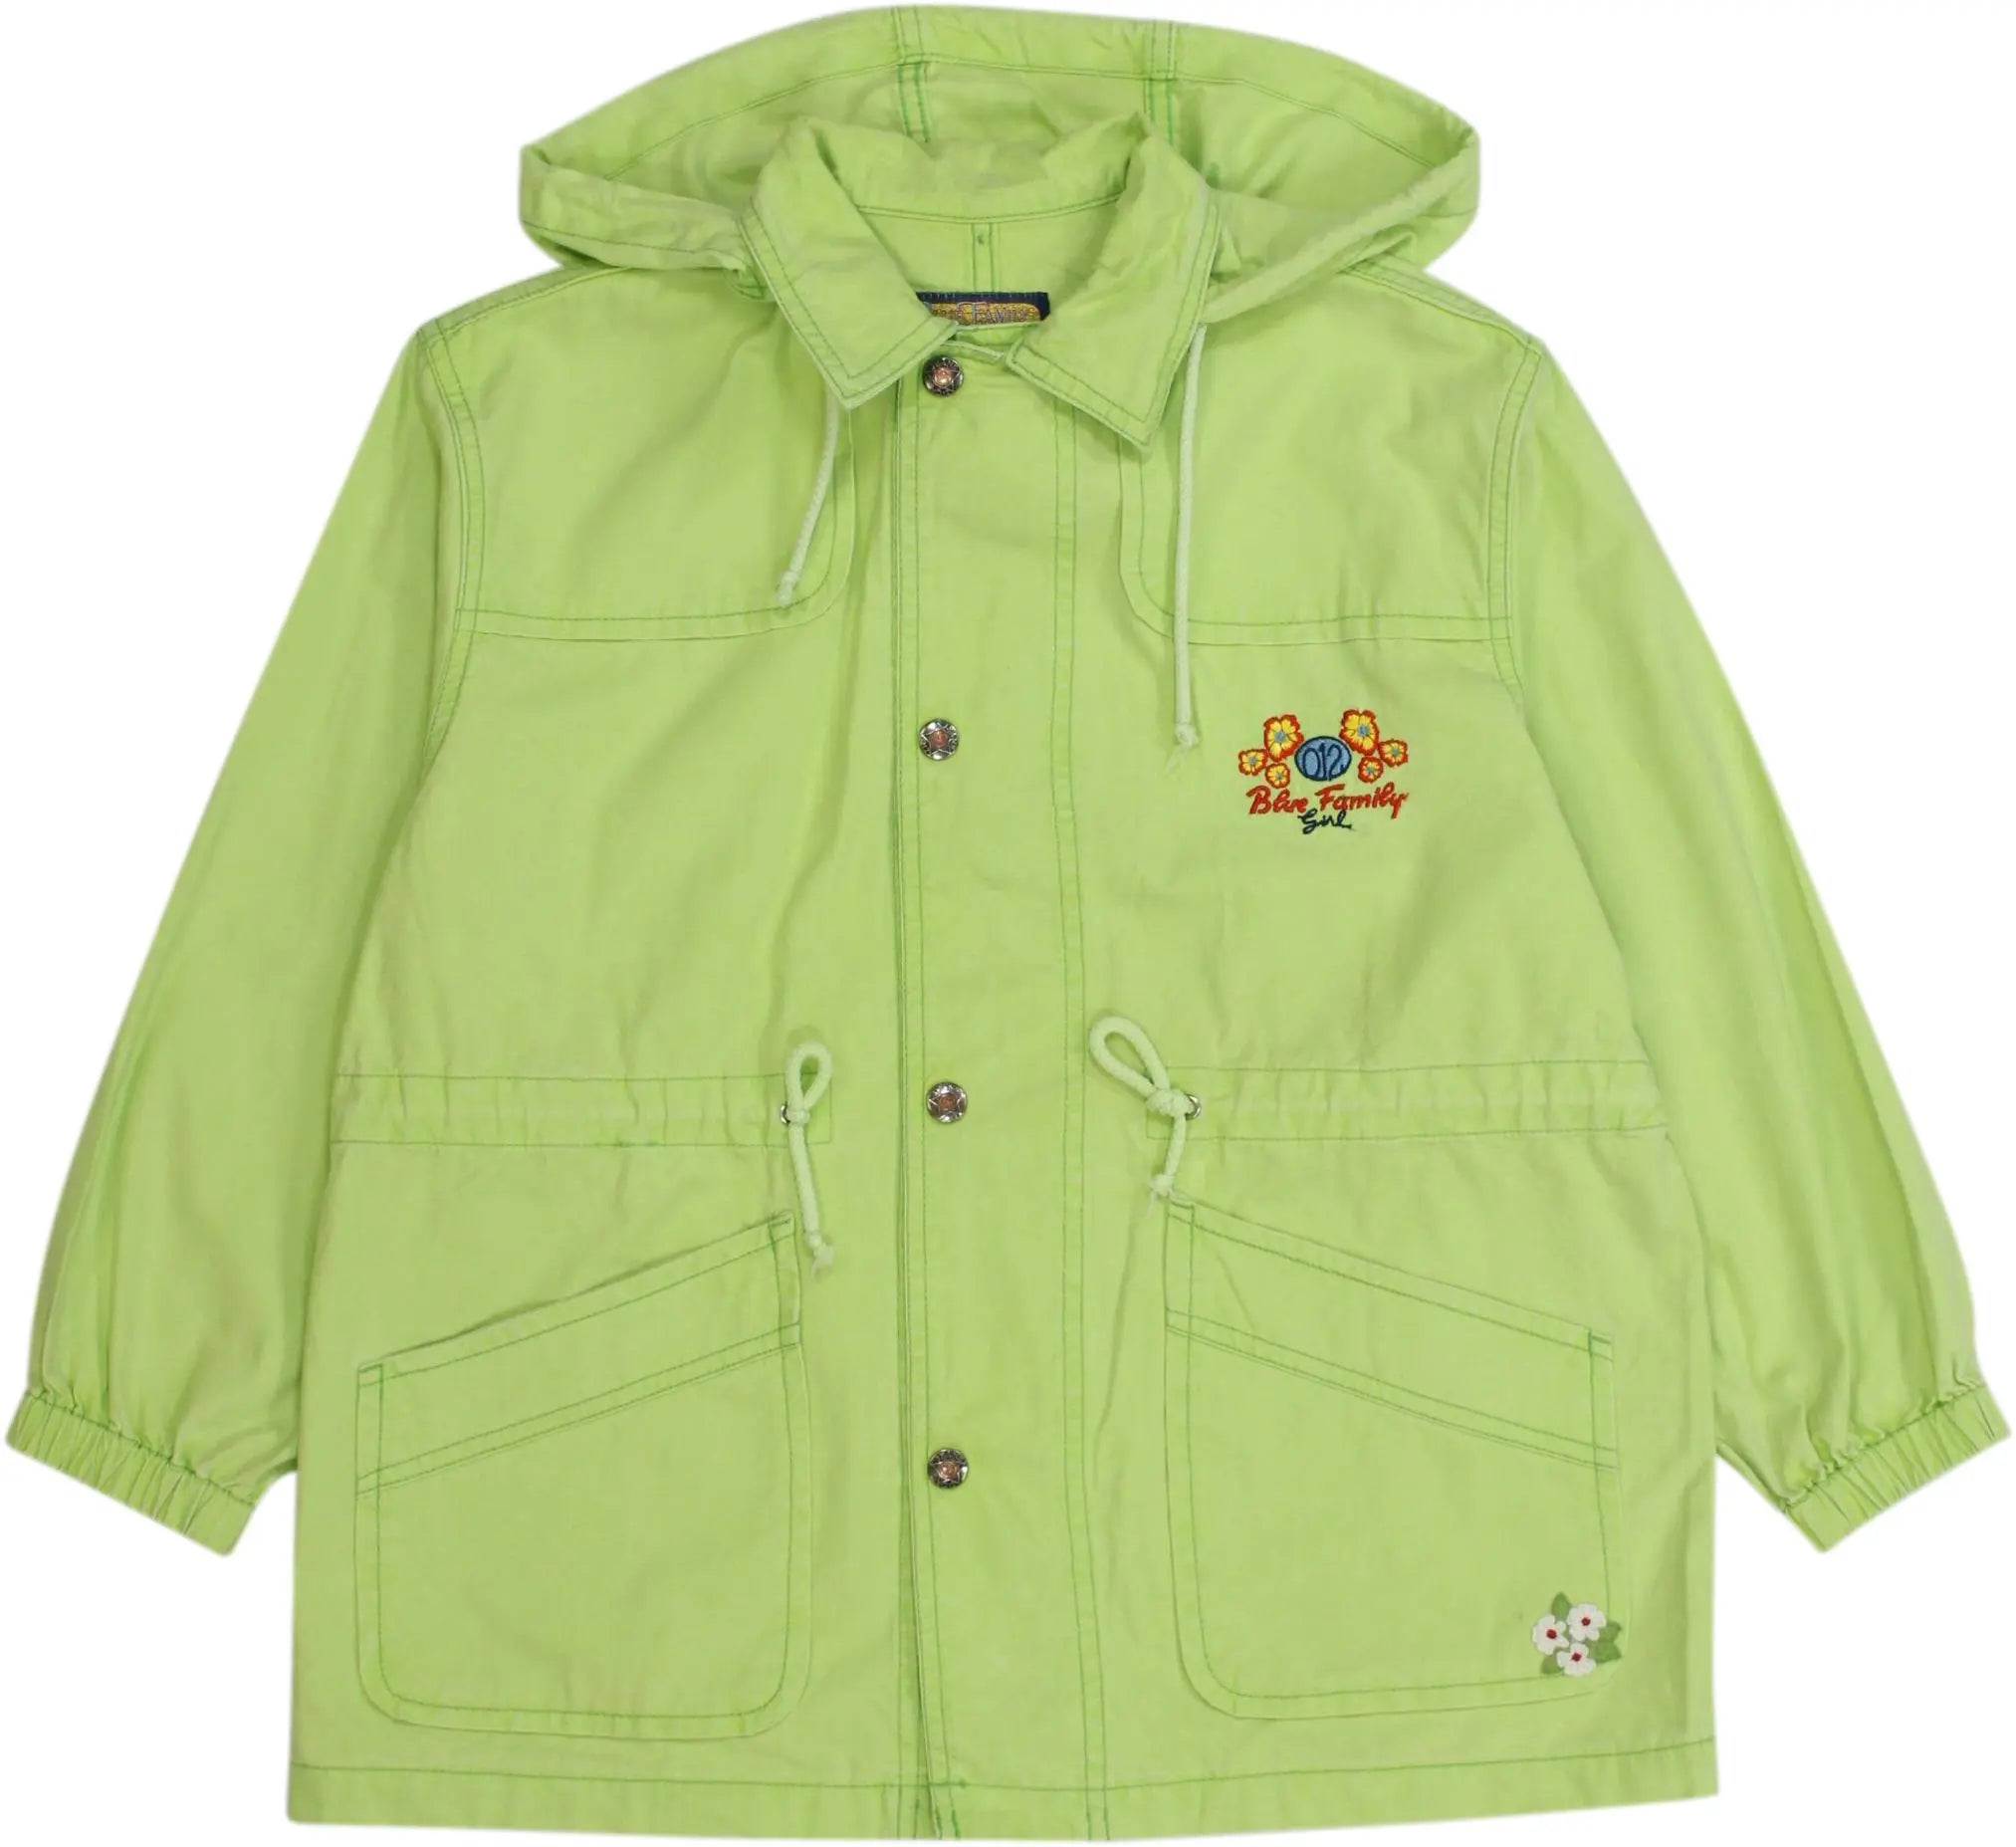 United Colors of Benetton - Green Jacket by United Colors of Benetton- ThriftTale.com - Vintage and second handclothing